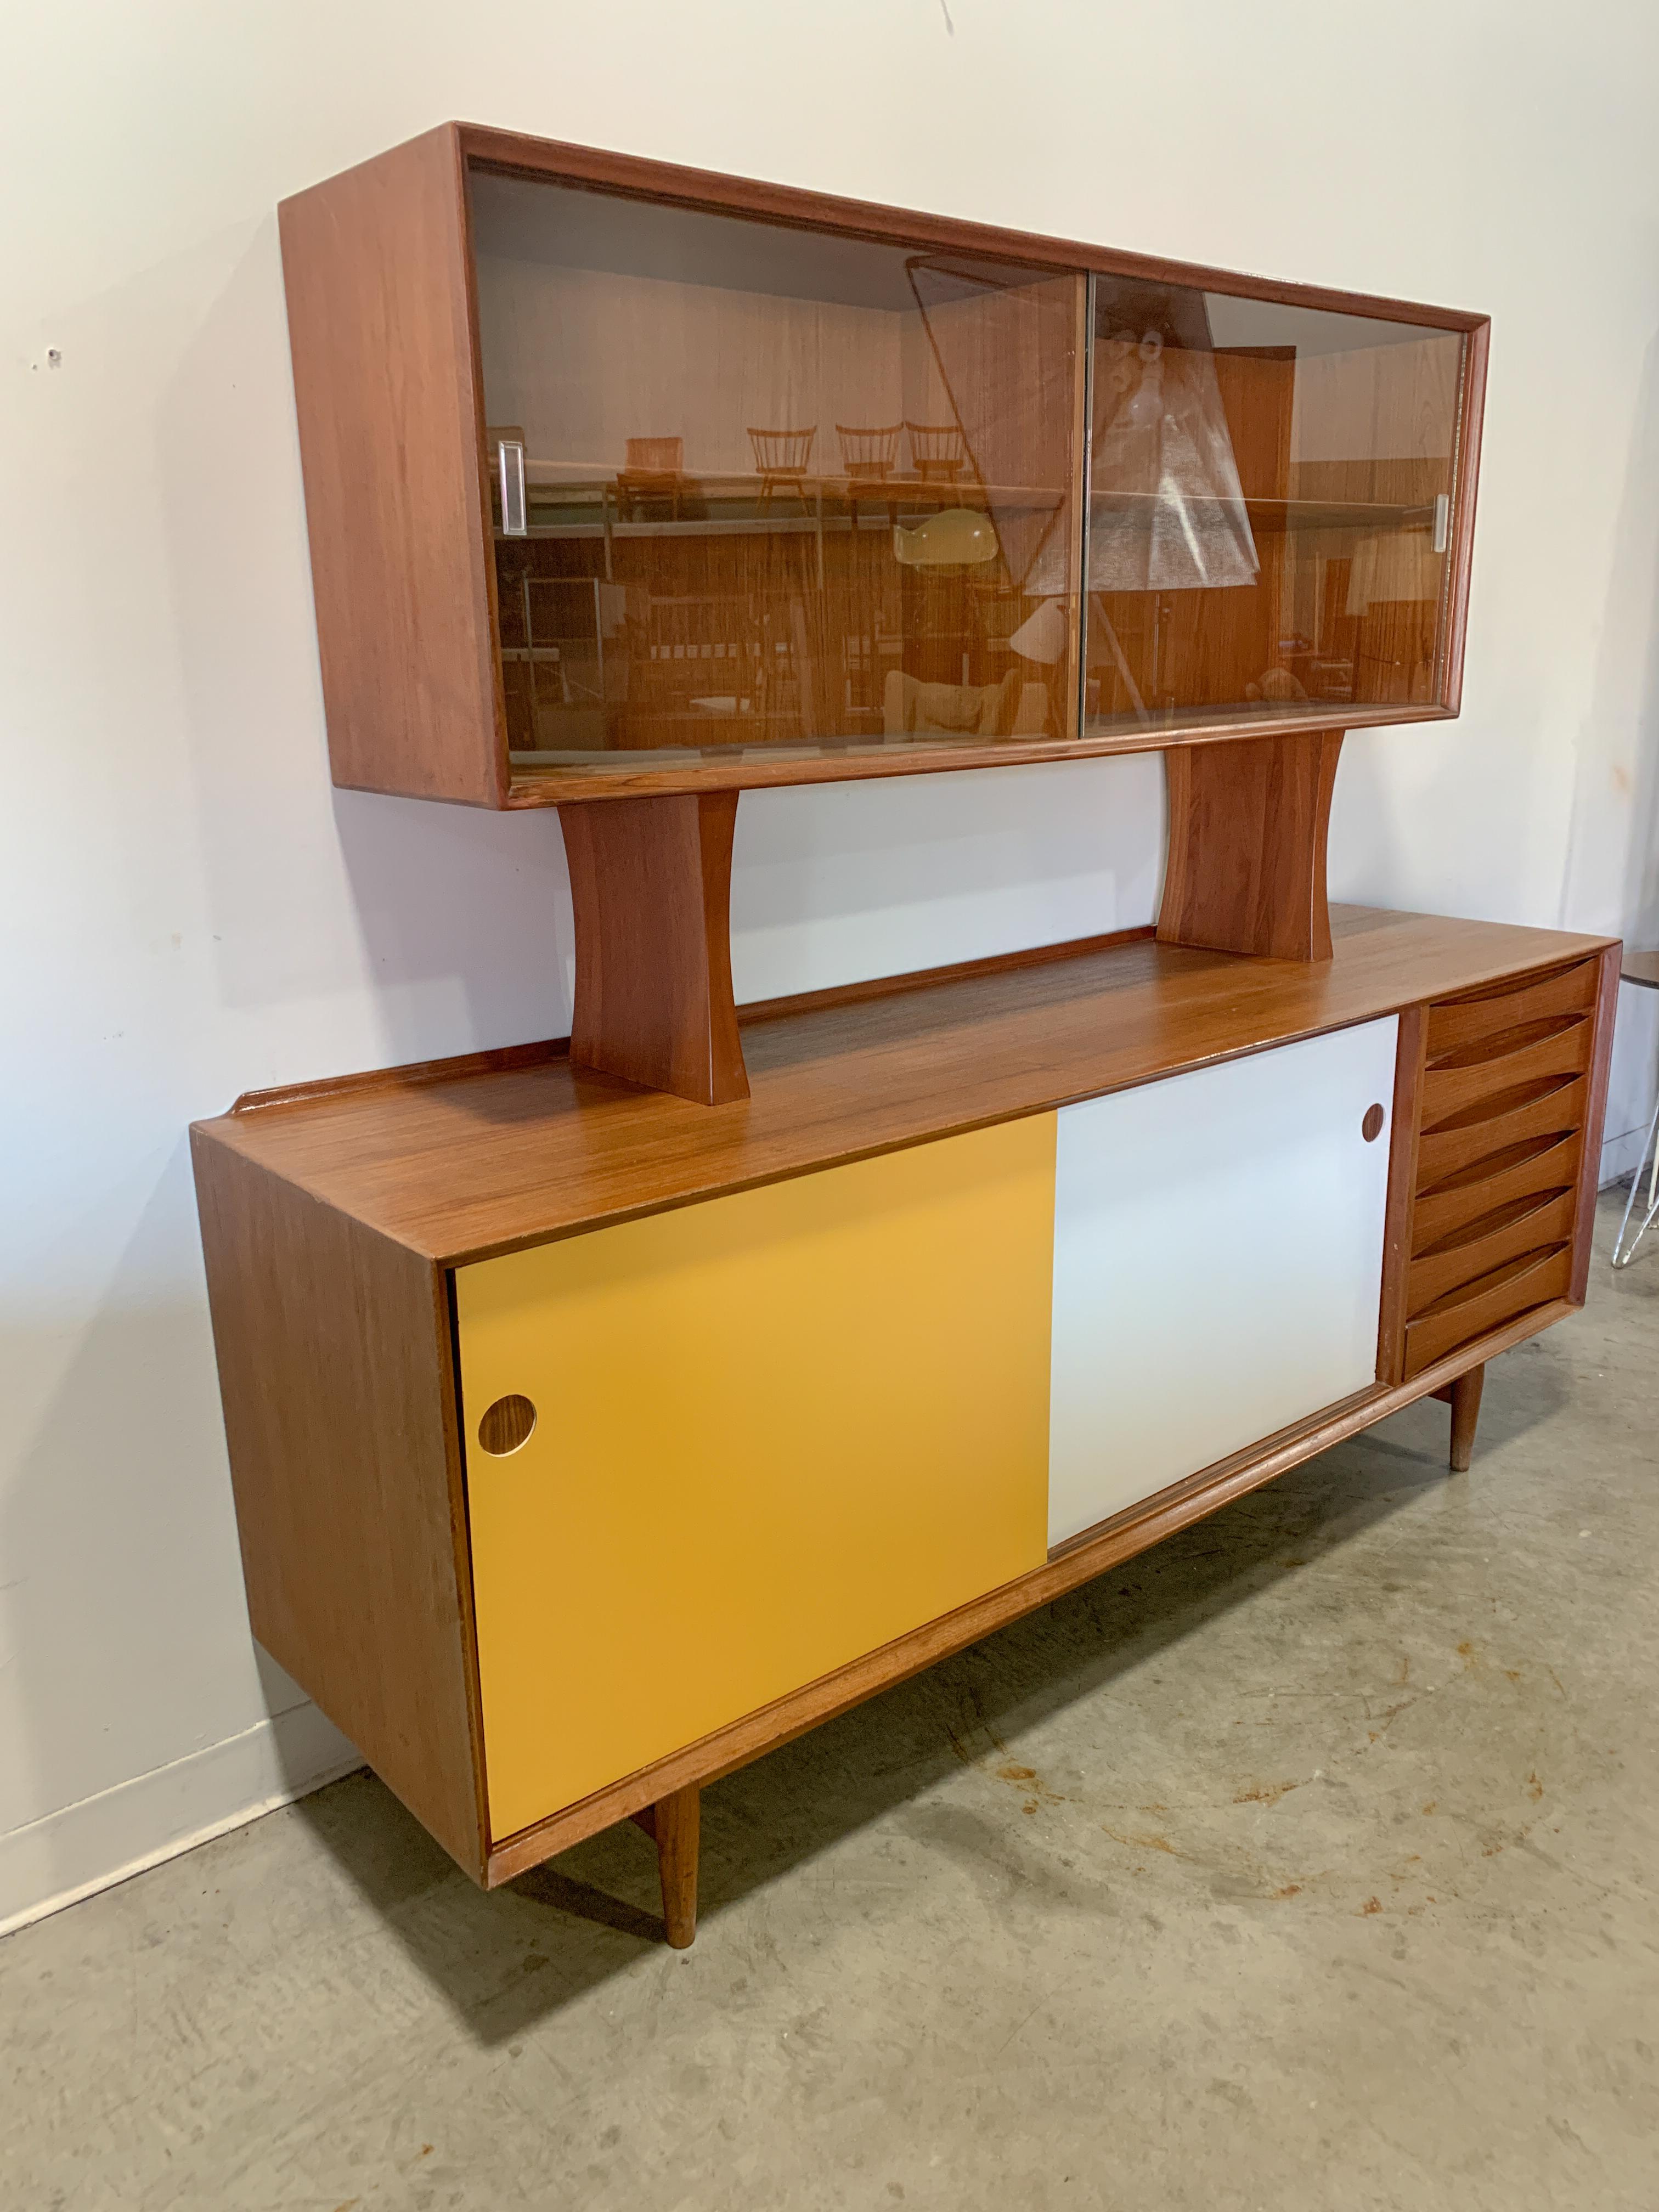 Striking teak and color panel Model 29 sideboard/credenza with hutch, both designed by Arne Vodder for Sibast. Sculpted drawer fronts, adjustable shelves and sliding doors make this a very versatile piece. The glass doors on the top piece can also